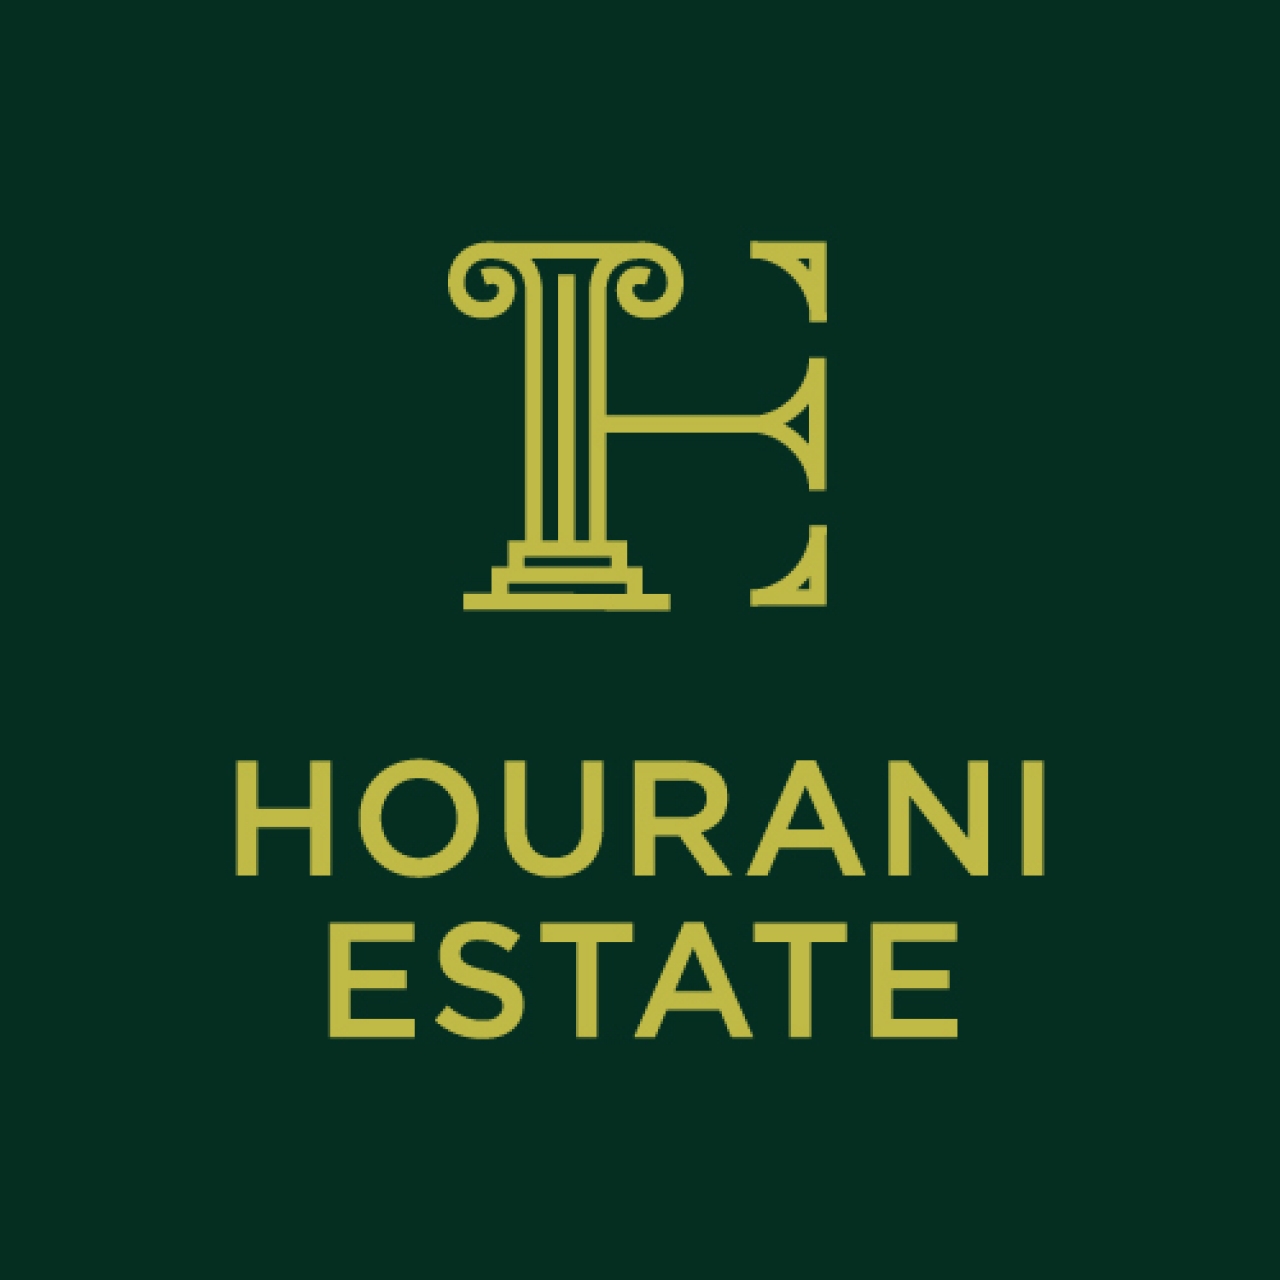 Hourani Olive Oil Estate logo design is the letter E and the lines of an ancient pillar. It uses darg green to reference olives and a warm yellow to reference the sun.